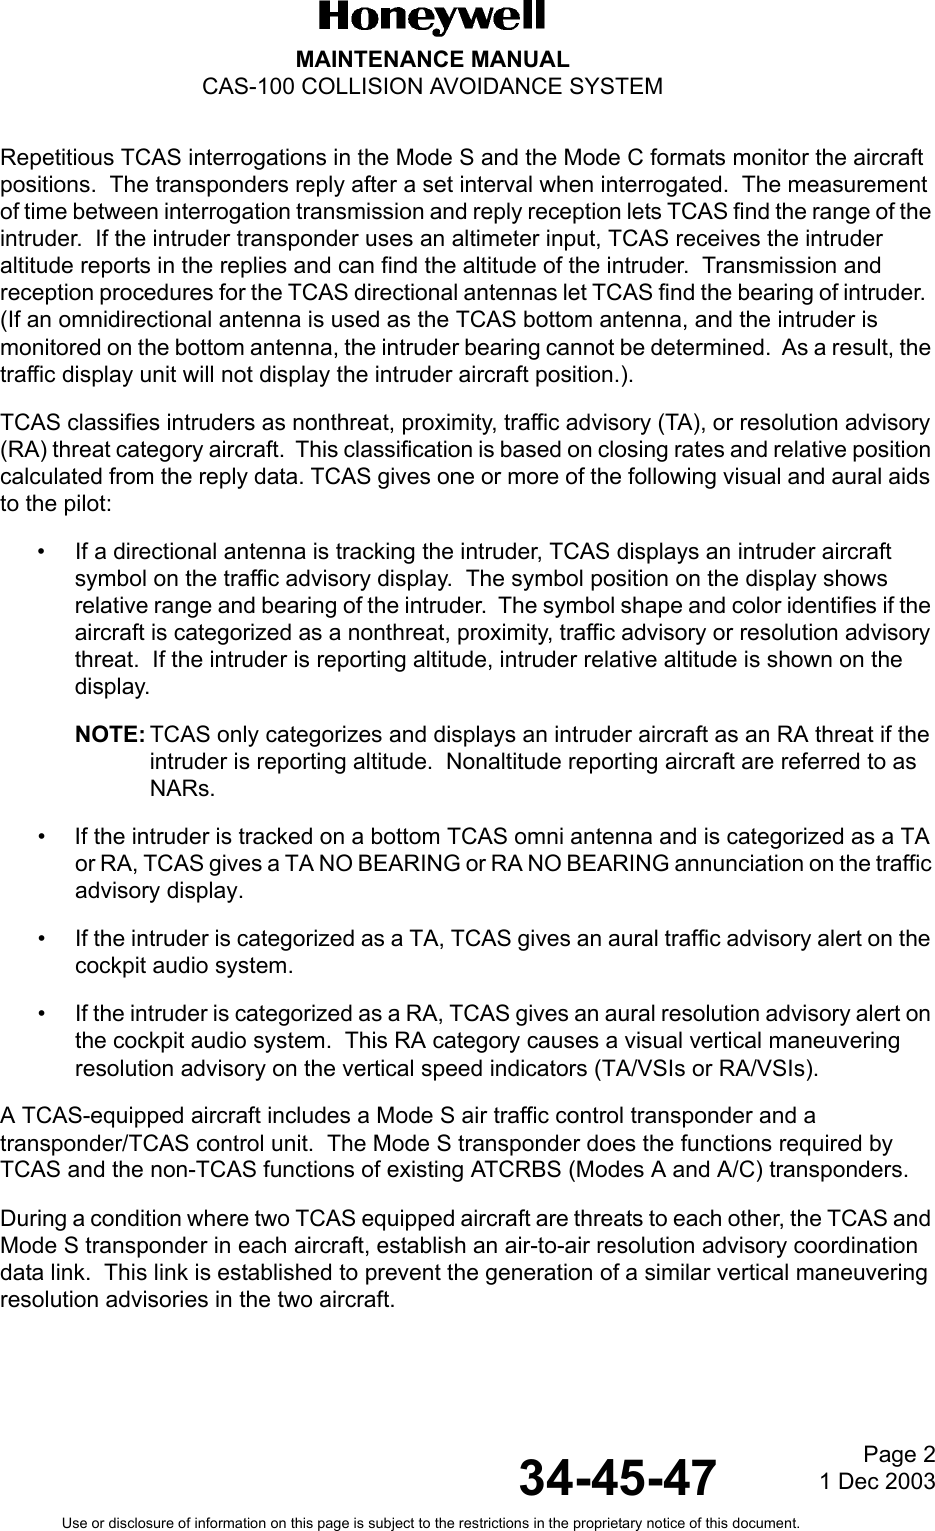 Page 21 Dec 200334-45-47MAINTENANCE MANUALCAS-100 COLLISION AVOIDANCE SYSTEMUse or disclosure of information on this page is subject to the restrictions in the proprietary notice of this document.Repetitious TCAS interrogations in the Mode S and the Mode C formats monitor the aircraft positions.  The transponders reply after a set interval when interrogated.  The measurement of time between interrogation transmission and reply reception lets TCAS find the range of the intruder.  If the intruder transponder uses an altimeter input, TCAS receives the intruder altitude reports in the replies and can find the altitude of the intruder.  Transmission and reception procedures for the TCAS directional antennas let TCAS find the bearing of intruder.  (If an omnidirectional antenna is used as the TCAS bottom antenna, and the intruder is monitored on the bottom antenna, the intruder bearing cannot be determined.  As a result, the traffic display unit will not display the intruder aircraft position.).TCAS classifies intruders as nonthreat, proximity, traffic advisory (TA), or resolution advisory (RA) threat category aircraft.  This classification is based on closing rates and relative position calculated from the reply data. TCAS gives one or more of the following visual and aural aids to the pilot:• If a directional antenna is tracking the intruder, TCAS displays an intruder aircraft symbol on the traffic advisory display.  The symbol position on the display shows relative range and bearing of the intruder.  The symbol shape and color identifies if the aircraft is categorized as a nonthreat, proximity, traffic advisory or resolution advisory threat.  If the intruder is reporting altitude, intruder relative altitude is shown on the display.NOTE: TCAS only categorizes and displays an intruder aircraft as an RA threat if the intruder is reporting altitude.  Nonaltitude reporting aircraft are referred to as NARs.• If the intruder is tracked on a bottom TCAS omni antenna and is categorized as a TA or RA, TCAS gives a TA NO BEARING or RA NO BEARING annunciation on the traffic advisory display.• If the intruder is categorized as a TA, TCAS gives an aural traffic advisory alert on the cockpit audio system.• If the intruder is categorized as a RA, TCAS gives an aural resolution advisory alert on the cockpit audio system.  This RA category causes a visual vertical maneuvering resolution advisory on the vertical speed indicators (TA/VSIs or RA/VSIs).A TCAS-equipped aircraft includes a Mode S air traffic control transponder and a transponder/TCAS control unit.  The Mode S transponder does the functions required by TCAS and the non-TCAS functions of existing ATCRBS (Modes A and A/C) transponders. During a condition where two TCAS equipped aircraft are threats to each other, the TCAS and Mode S transponder in each aircraft, establish an air-to-air resolution advisory coordination data link.  This link is established to prevent the generation of a similar vertical maneuvering resolution advisories in the two aircraft.